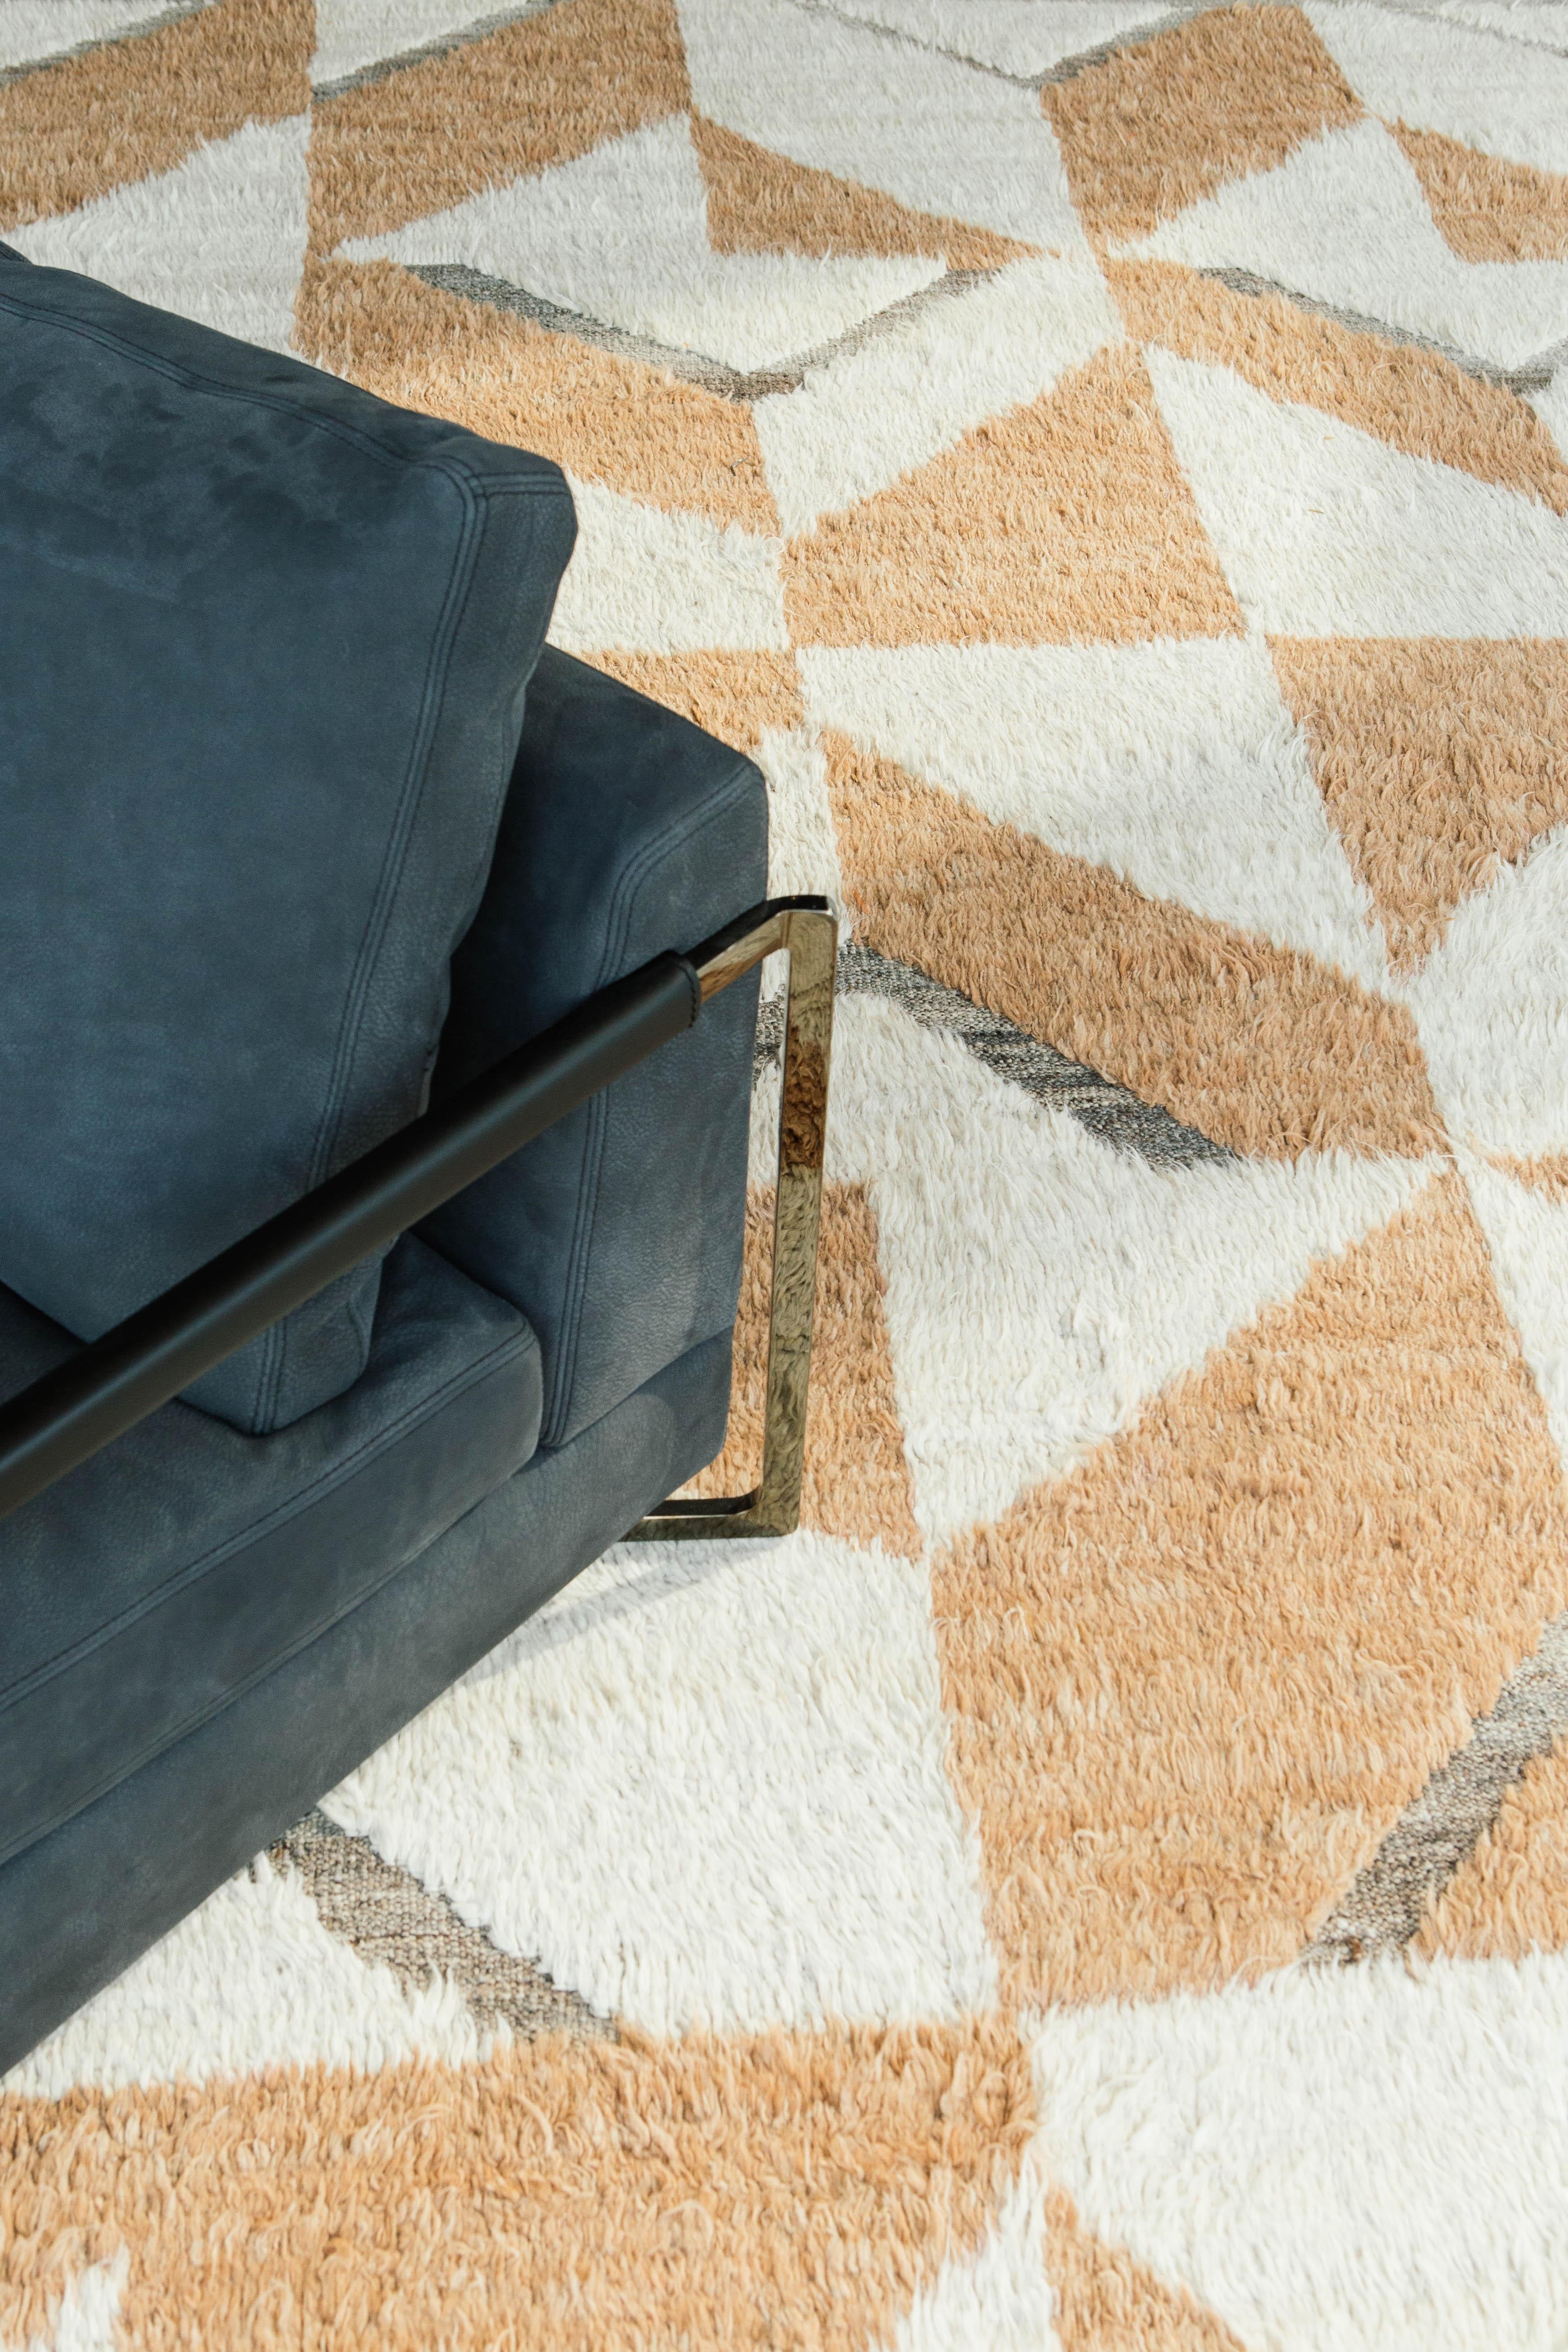 Handwoven of wool, Calcere uses geometric repeating patterns across the border. Peach toned orange and the perfect shade of white make up a short shag surface with a natural earth toned flat weave underlying the embossed detailing.



Rug number